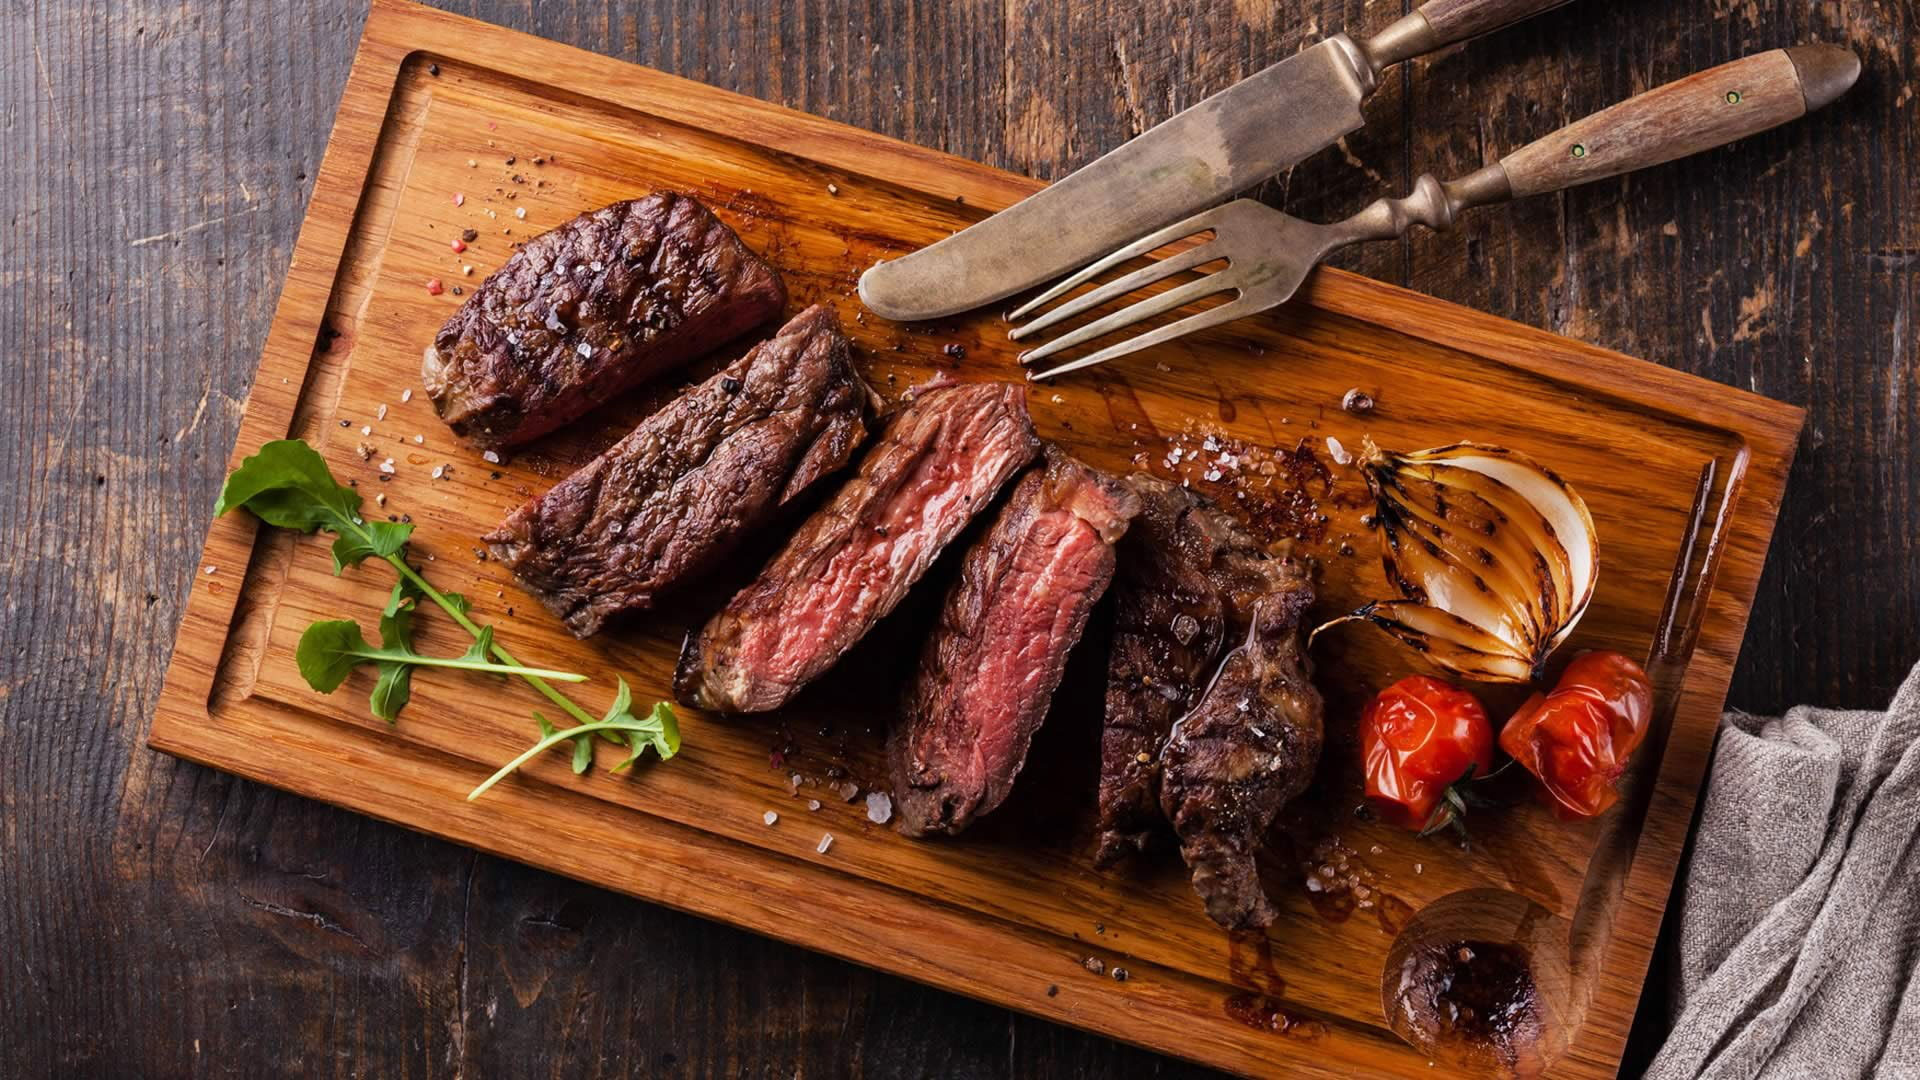 Meat wallpaper, food, steak, wood, muscles, death, cow, animals, tomatoes